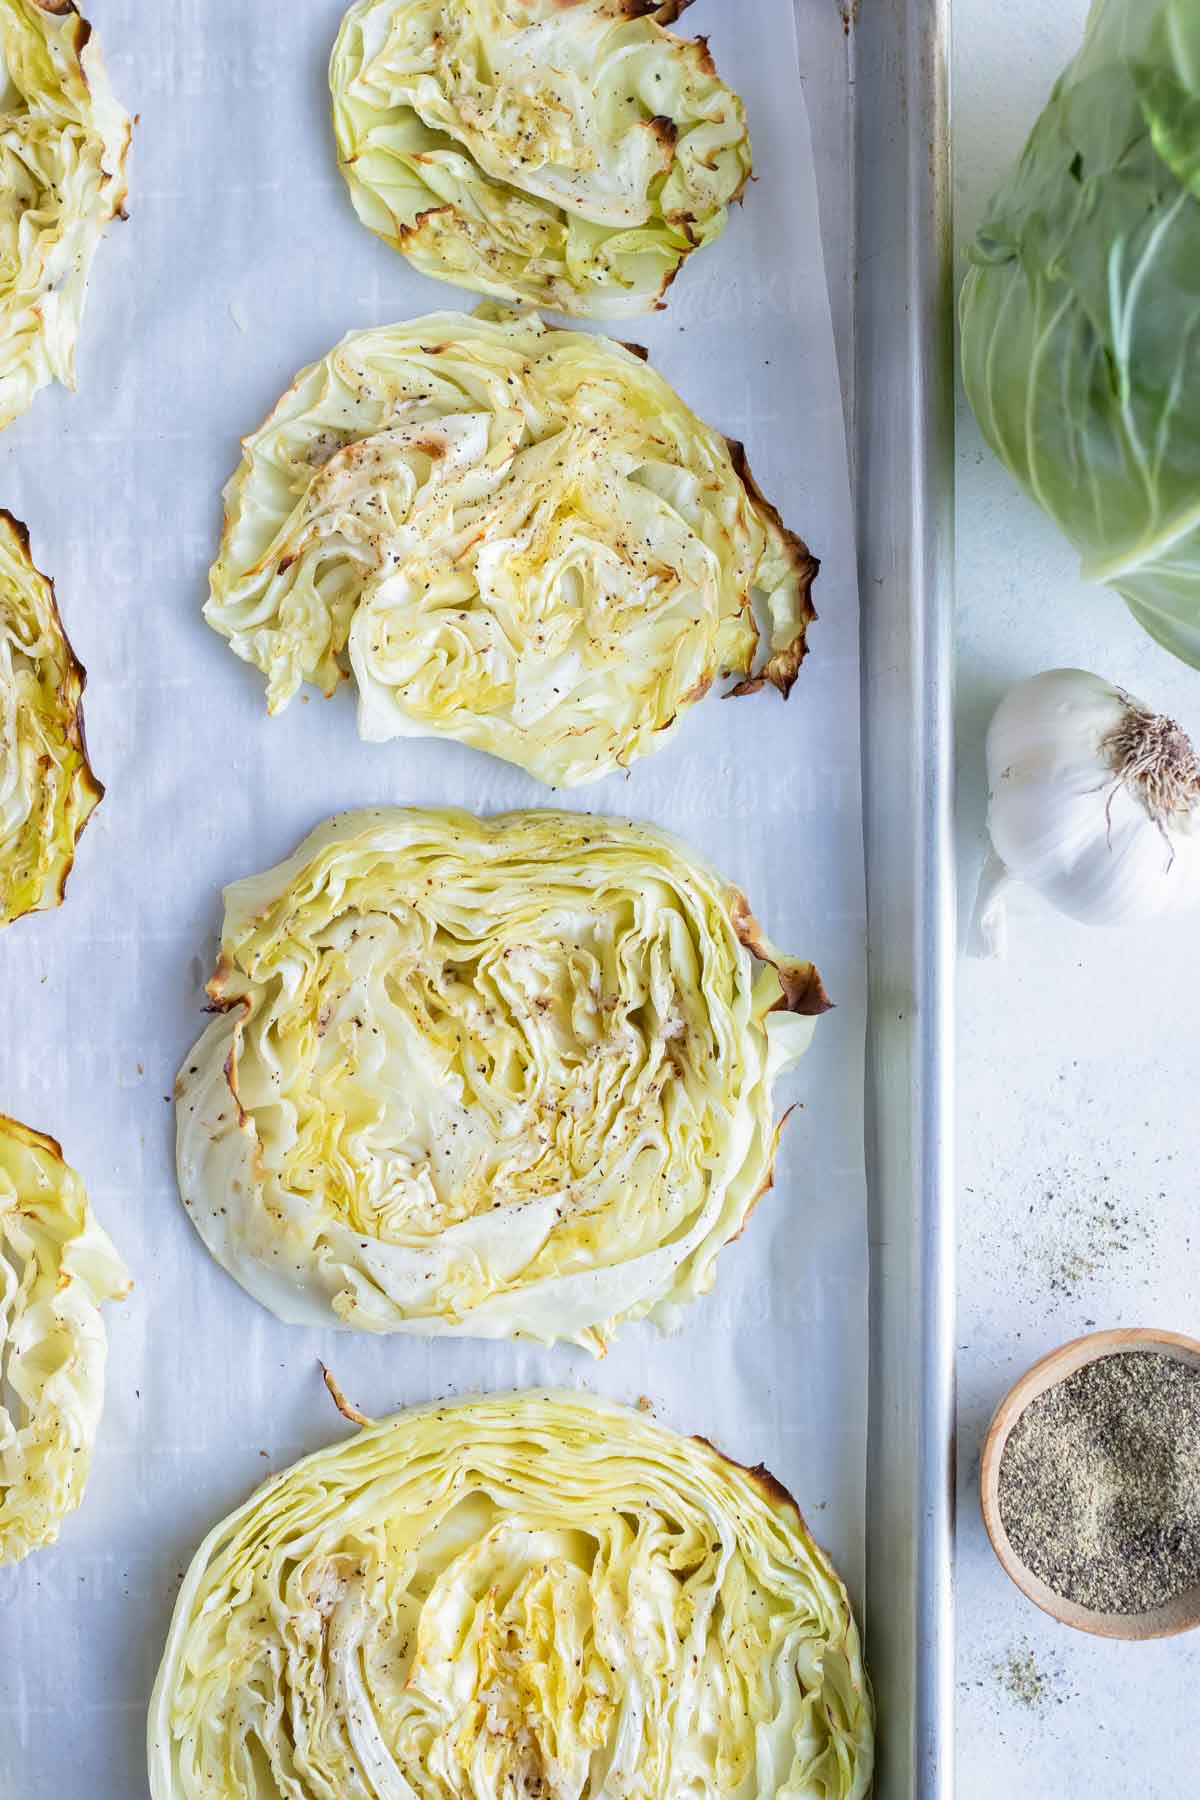 Low-carb cabbage steaks are roasted in the oven on a baking sheet.